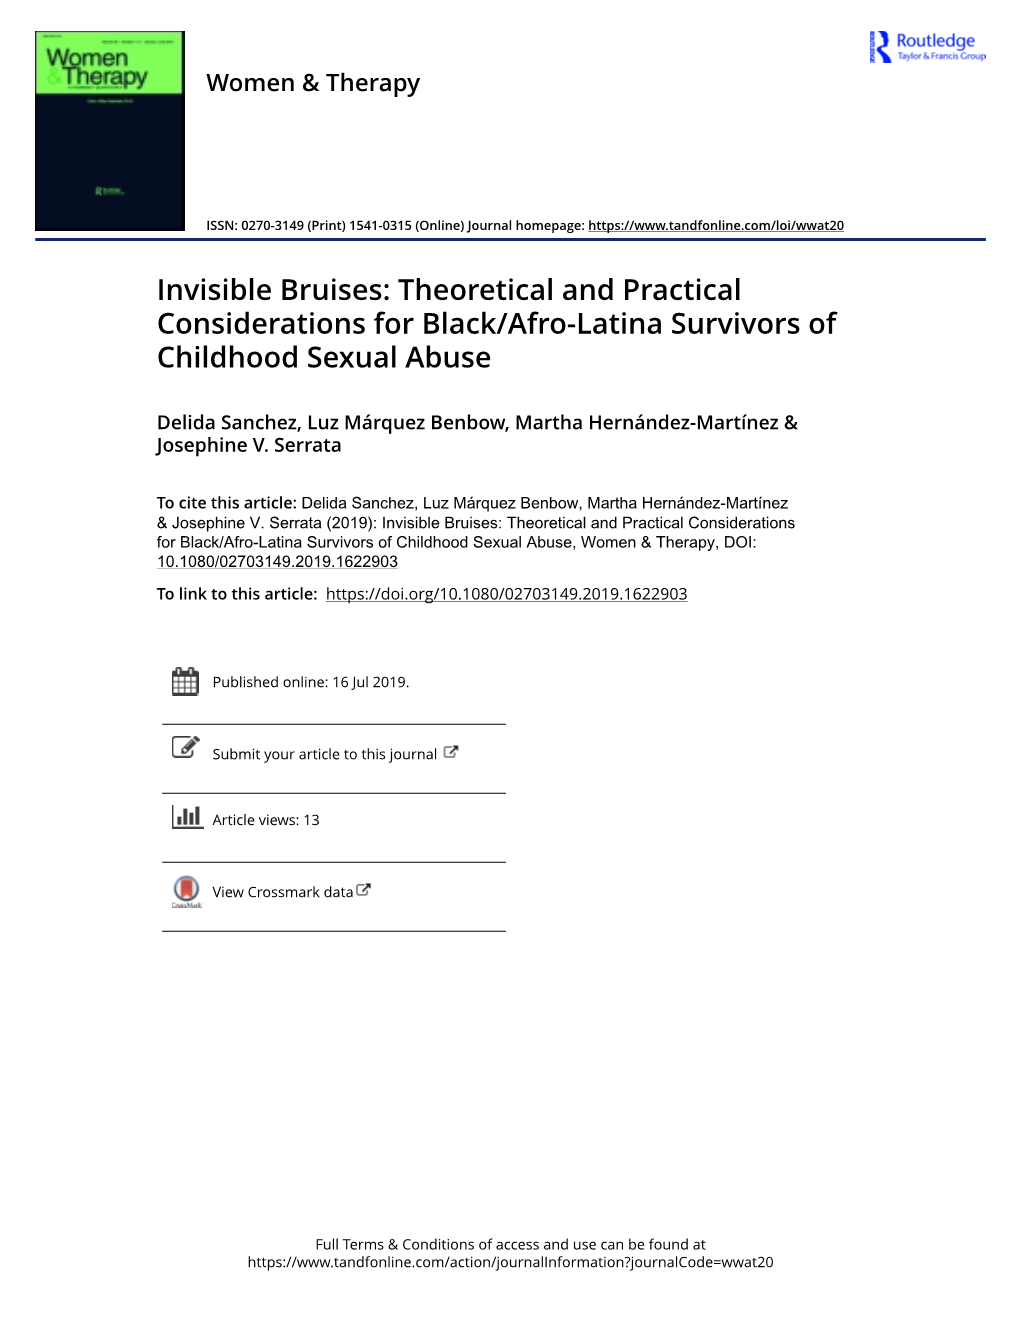 Invisible Bruises: Theoretical and Practical Considerations for Black/Afro-Latina Survivors of Childhood Sexual Abuse